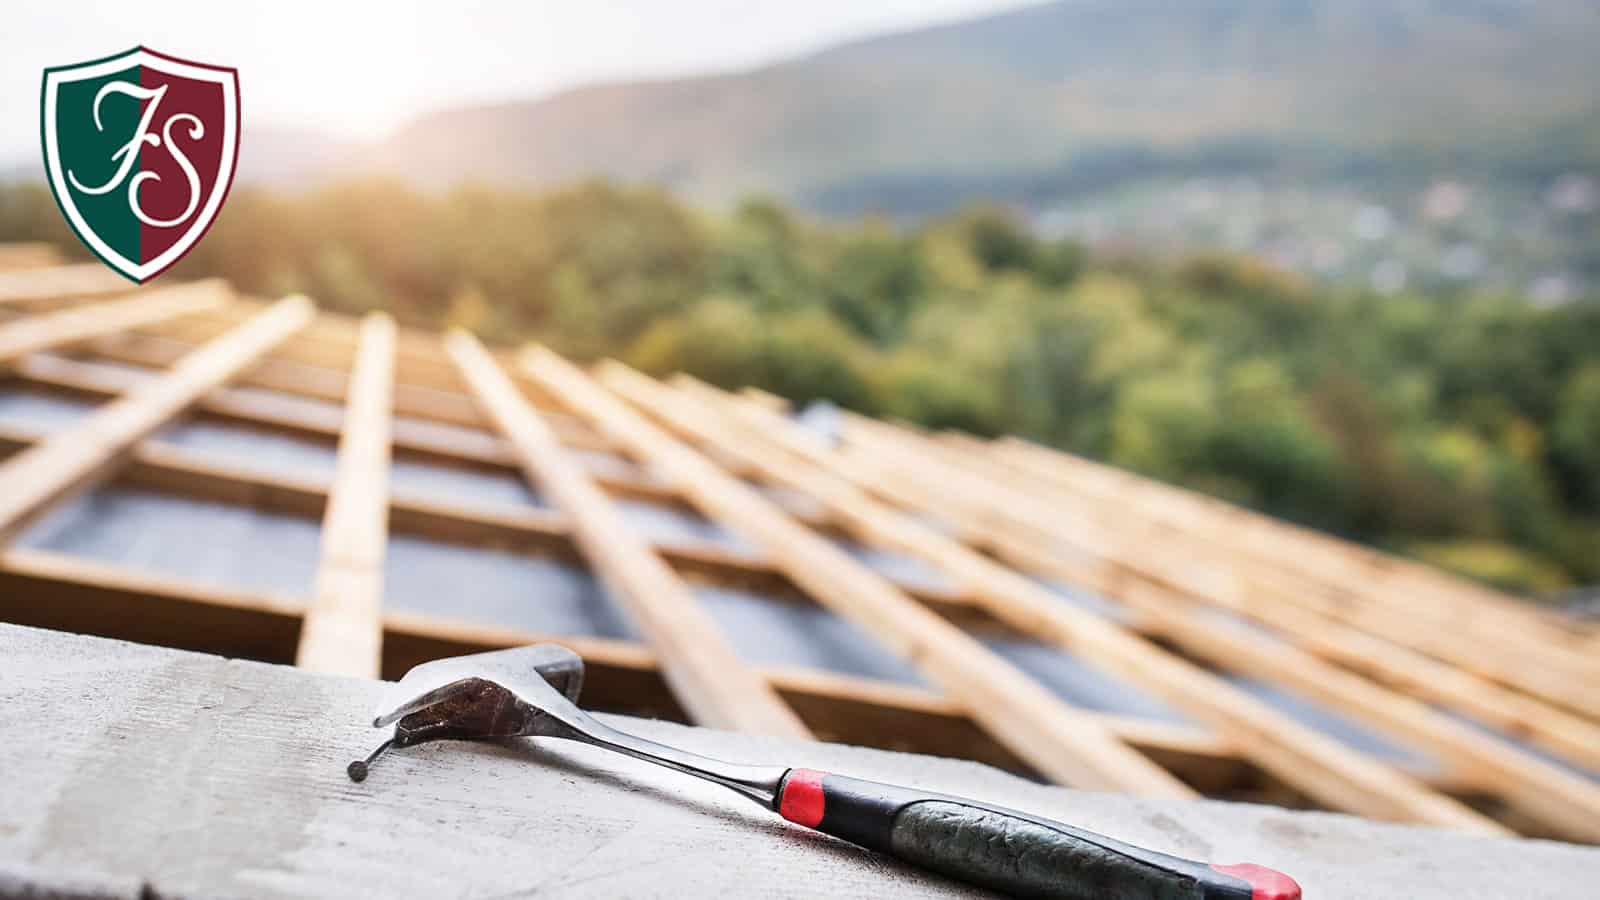 The weather is warming up. Are you ready? Here are 5 spring roof maintenance tips to be prepared.